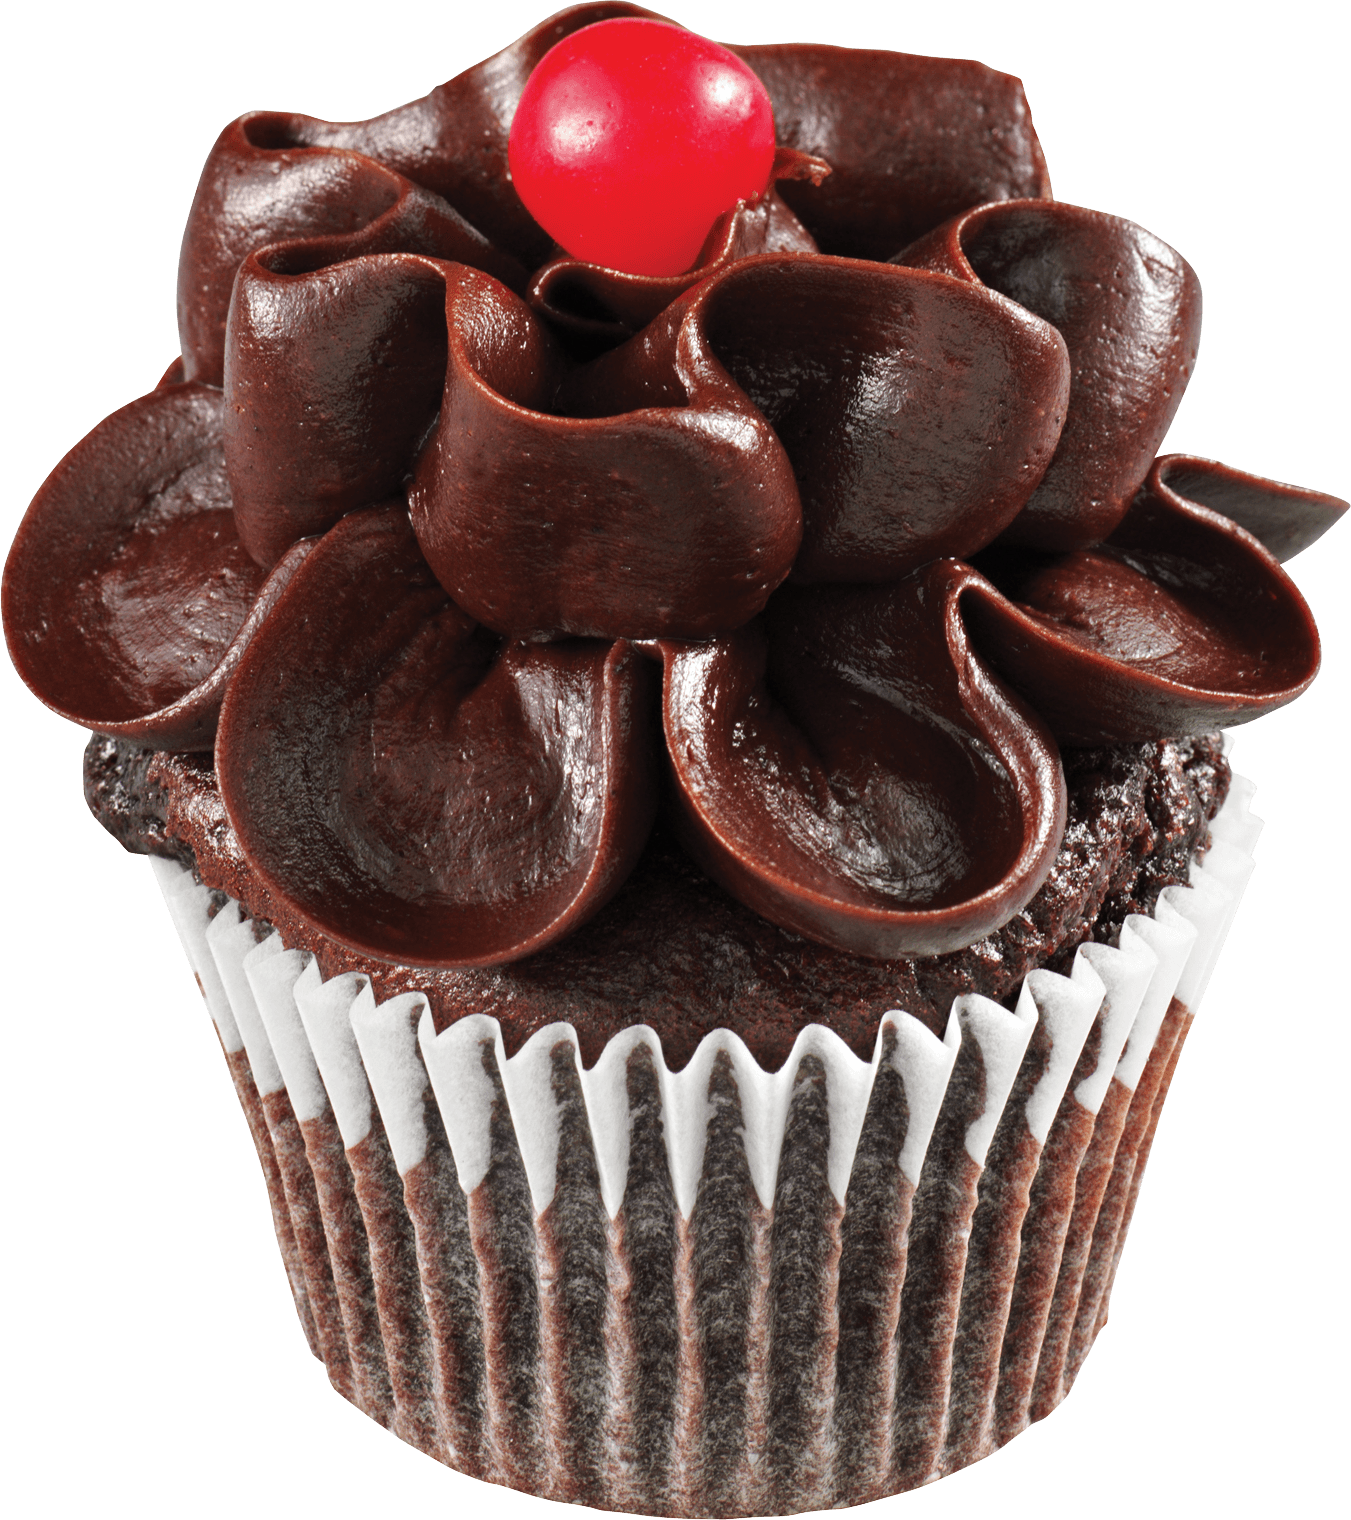 Cupcakes PNG HD Transparent Cupcakes HD.PNG Images. | PlusPNG